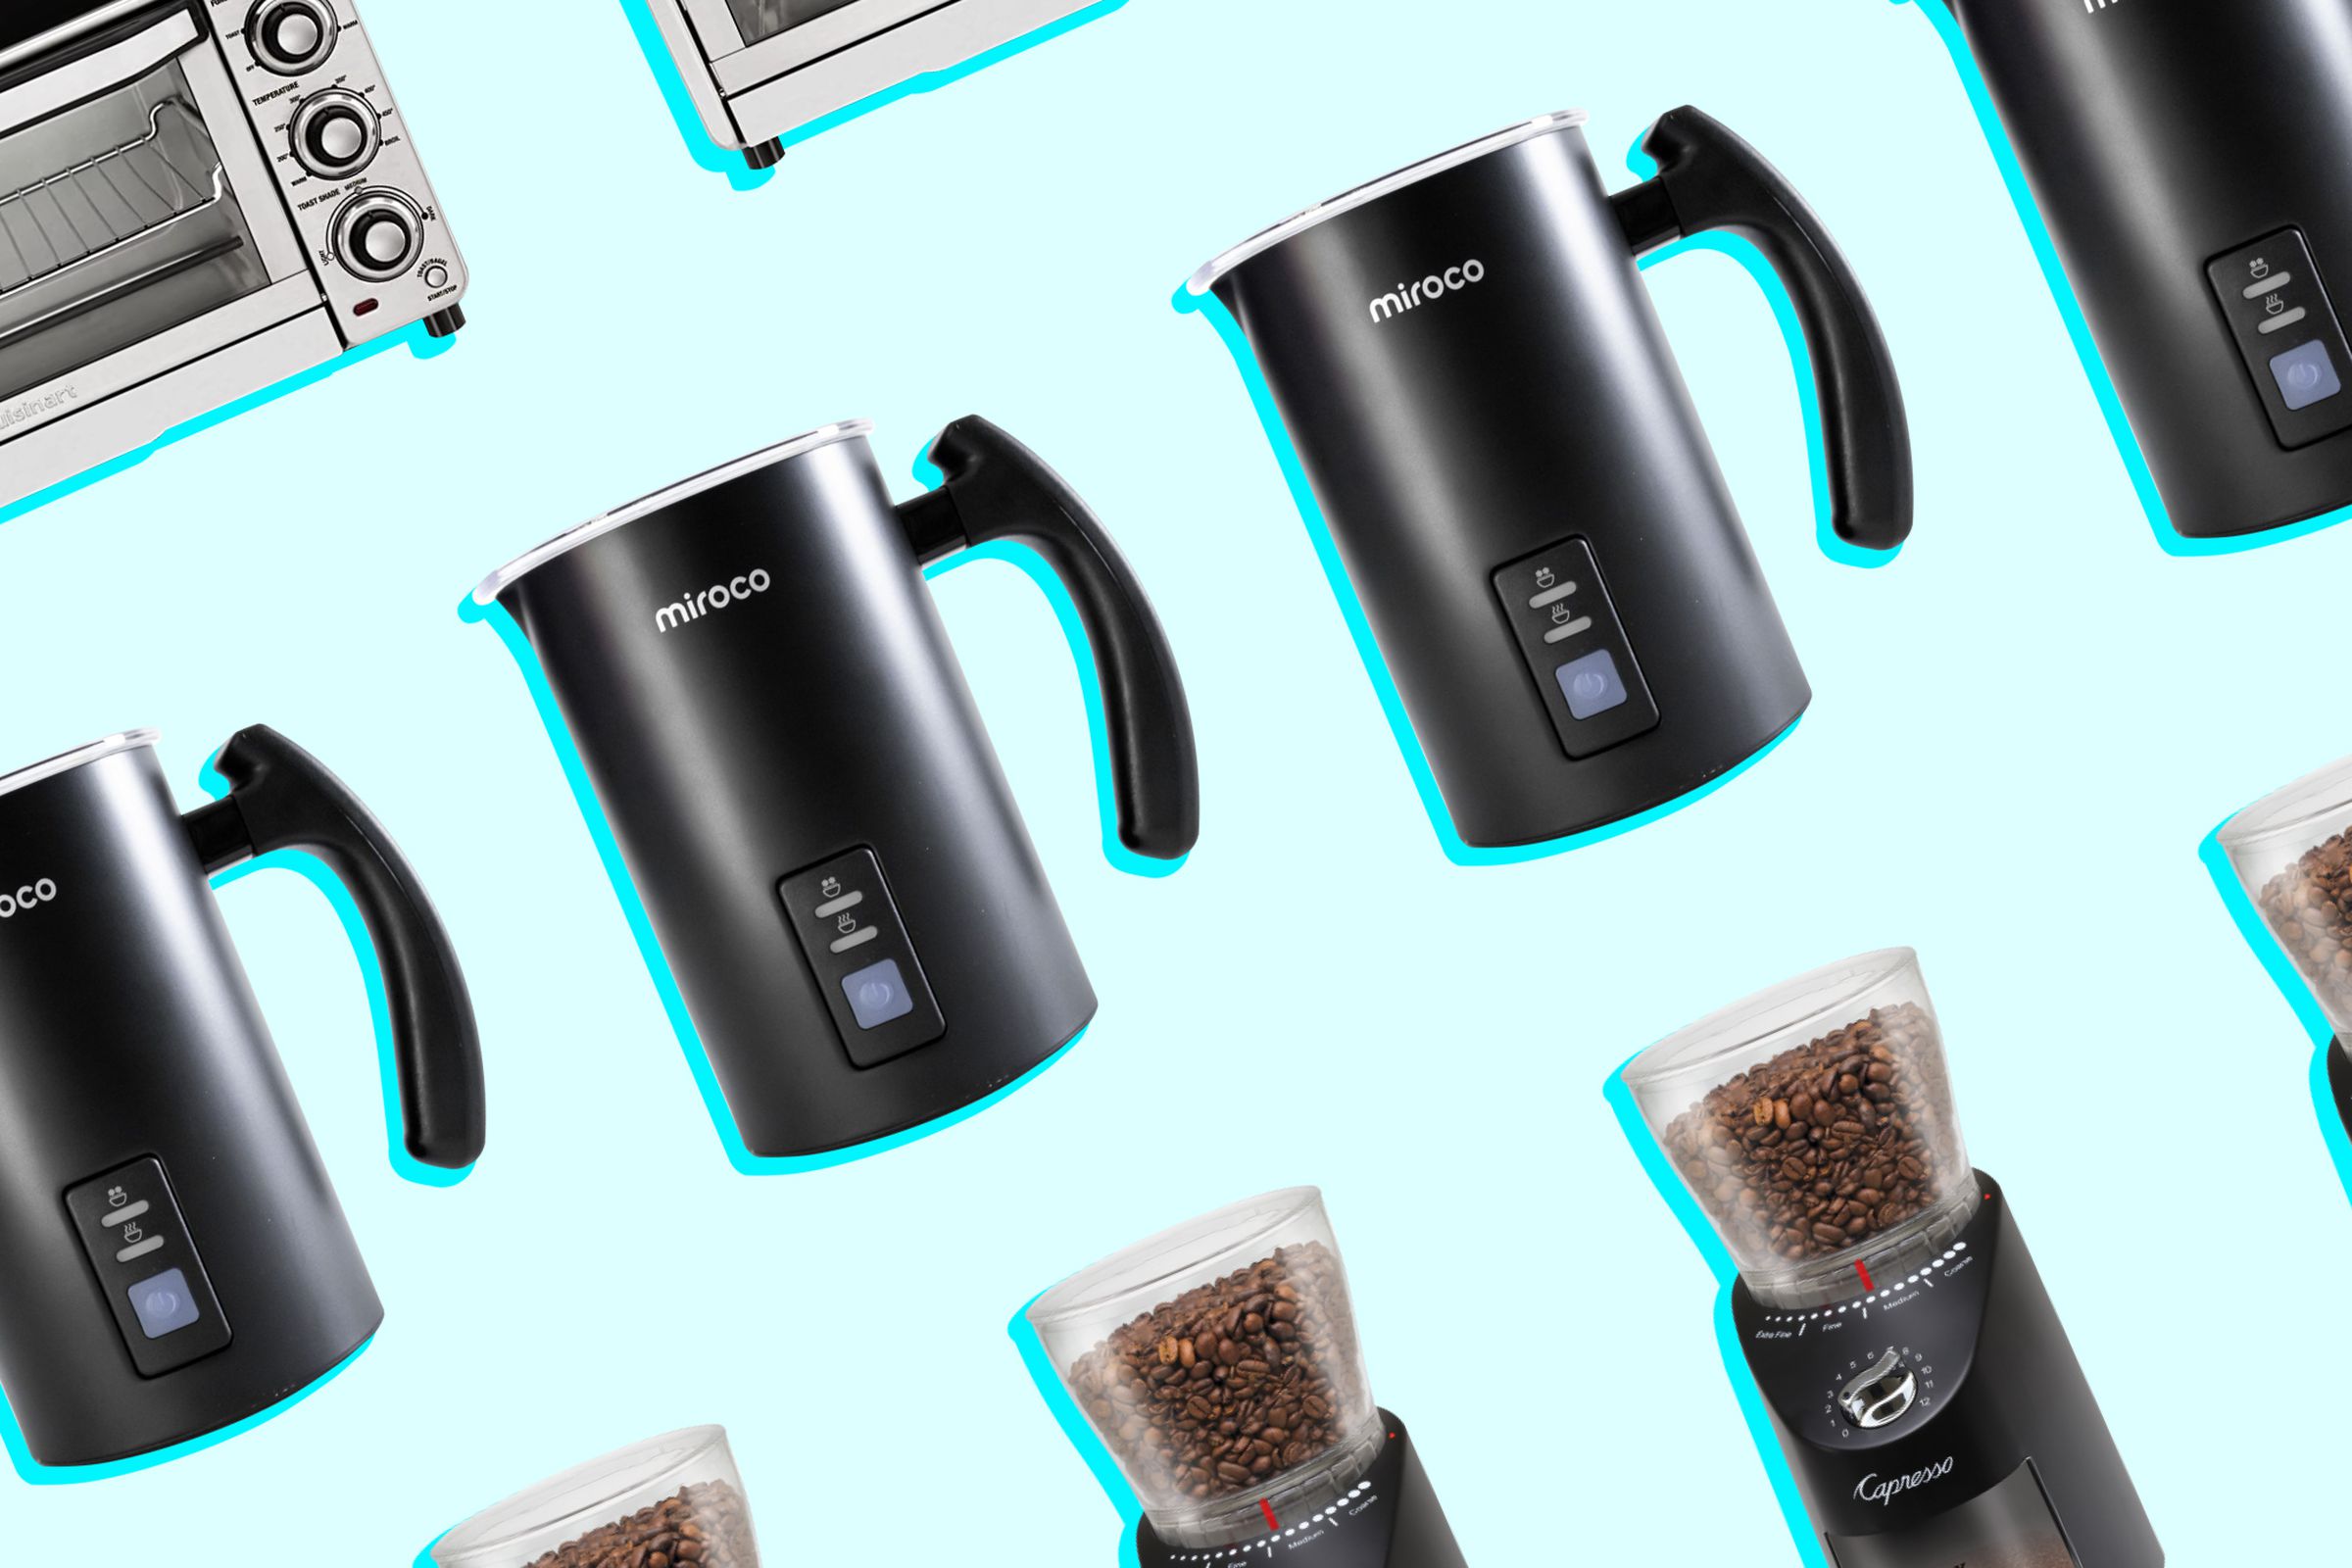 13 of The Verge’s best-loved cooking gadgets - The Verge